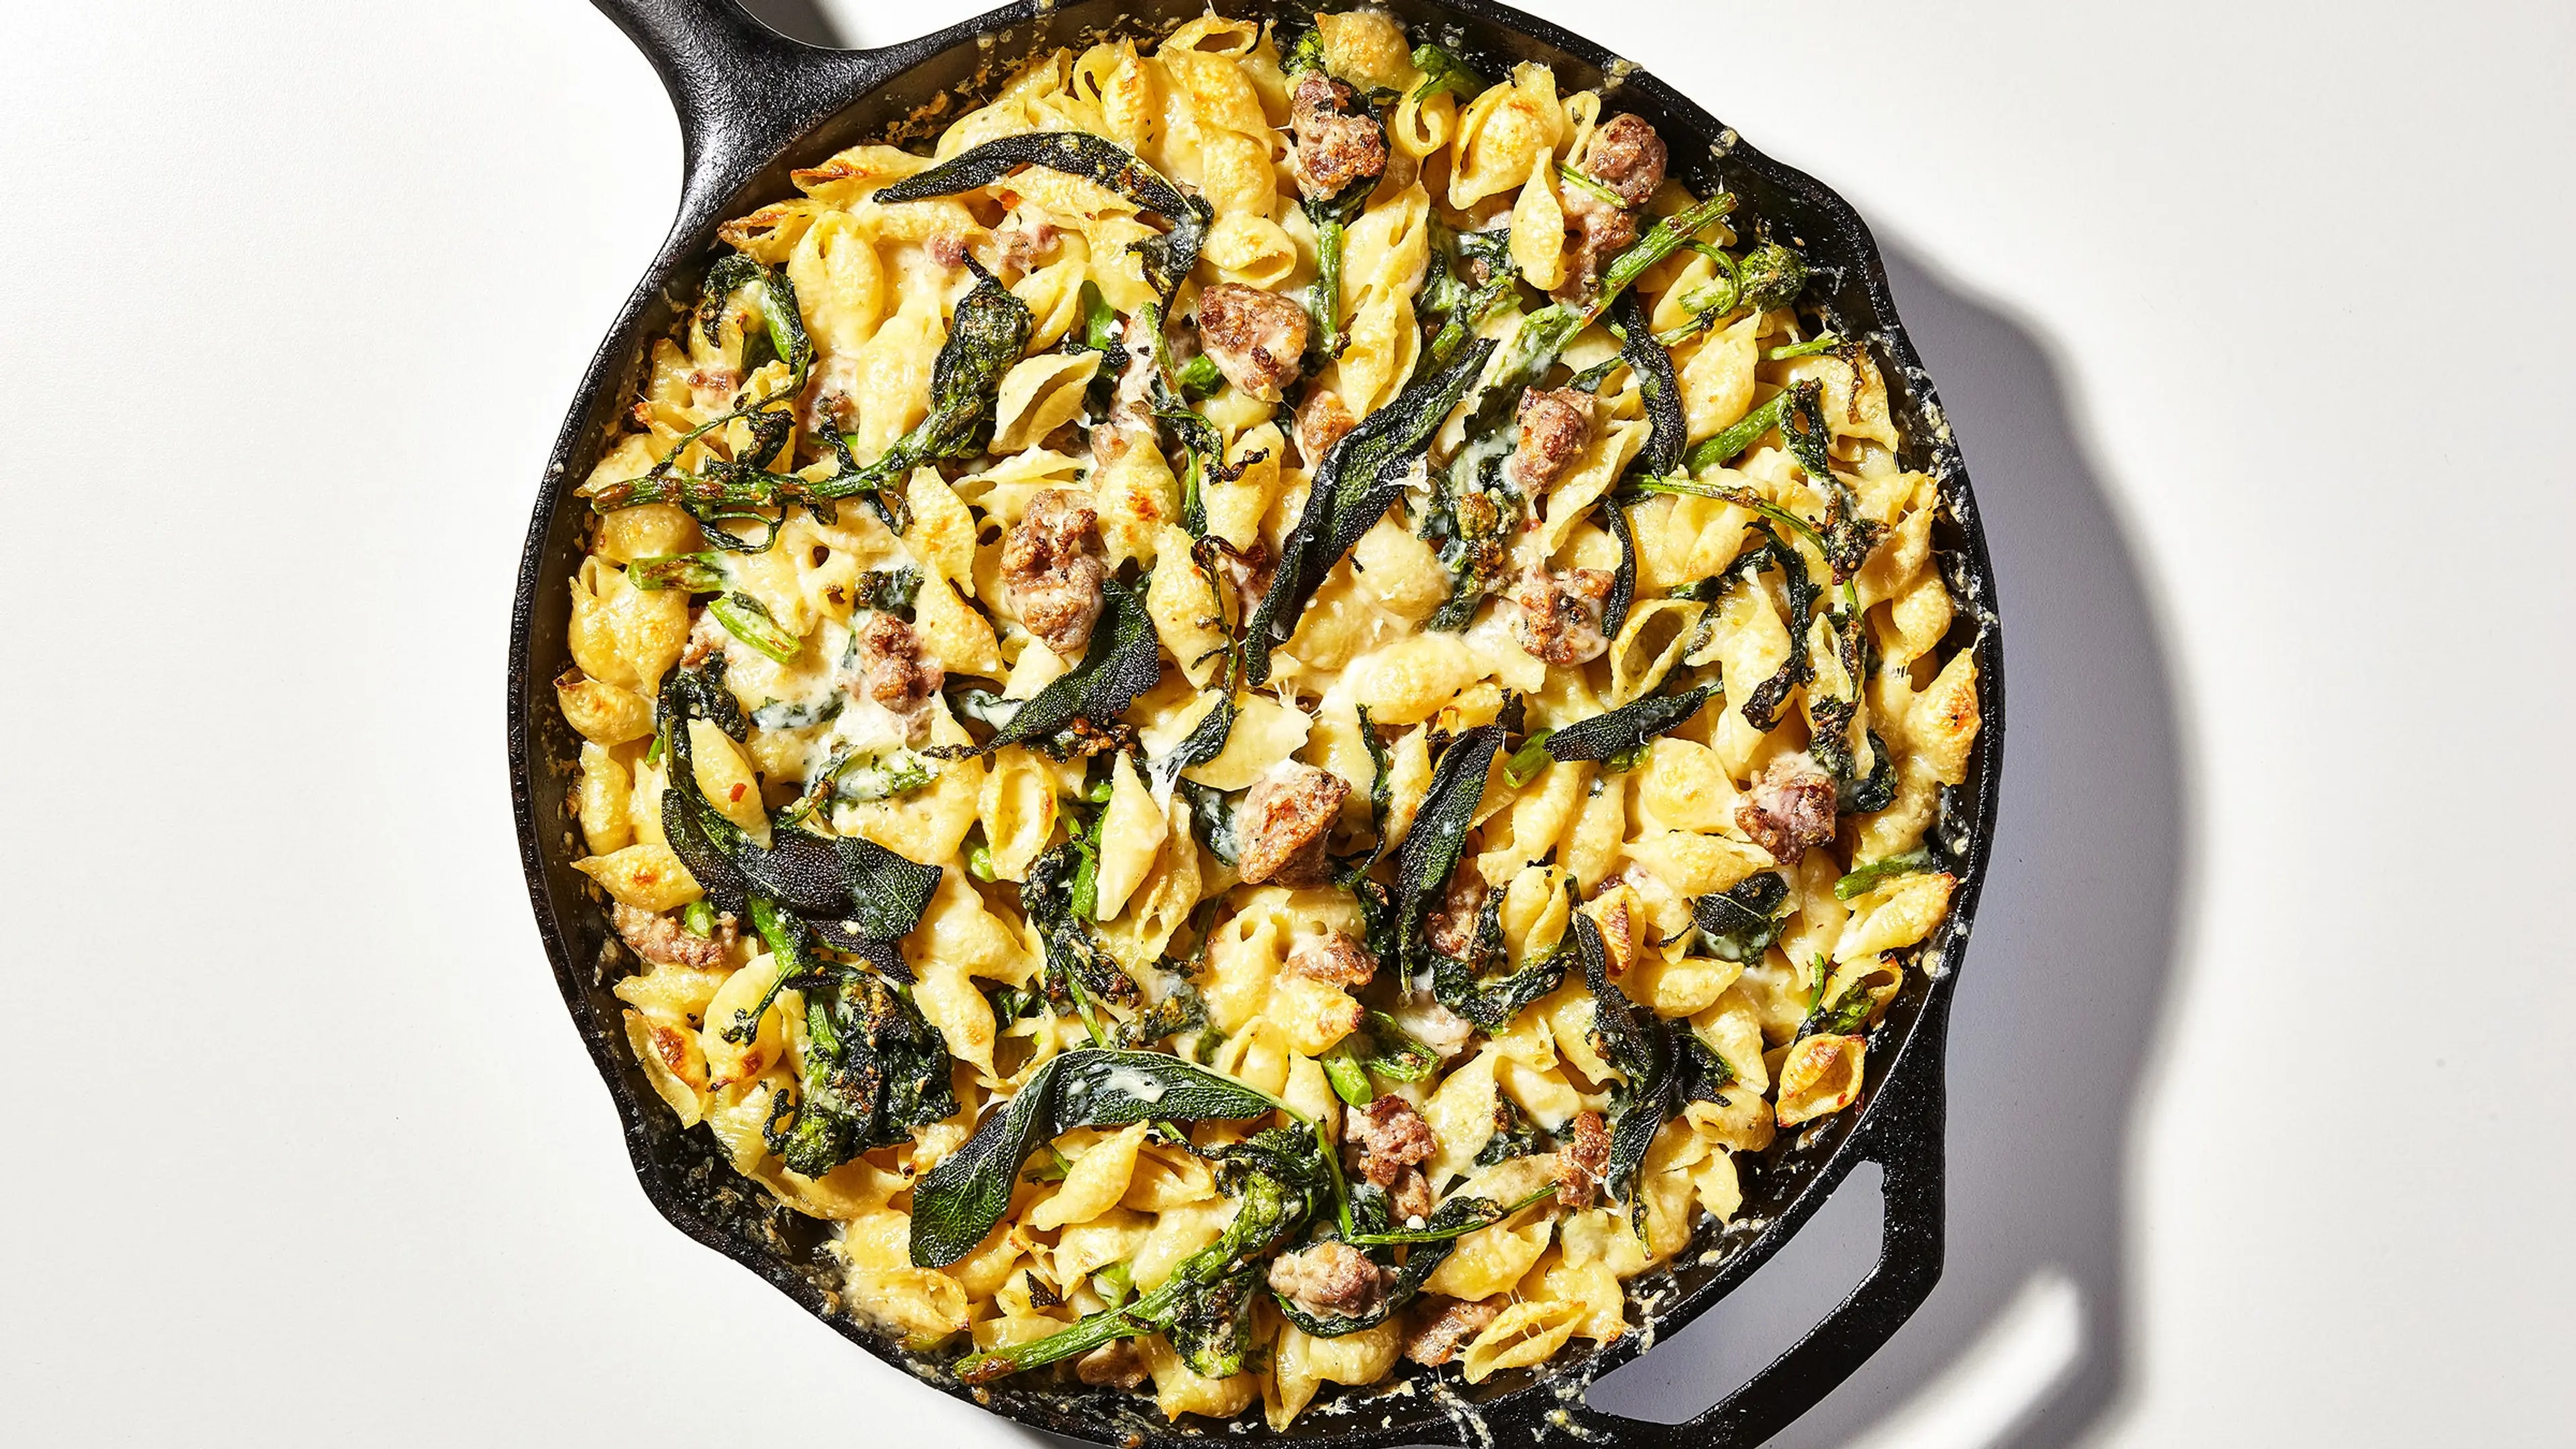 Baked Pasta With Sausage and Broccoli Rabe